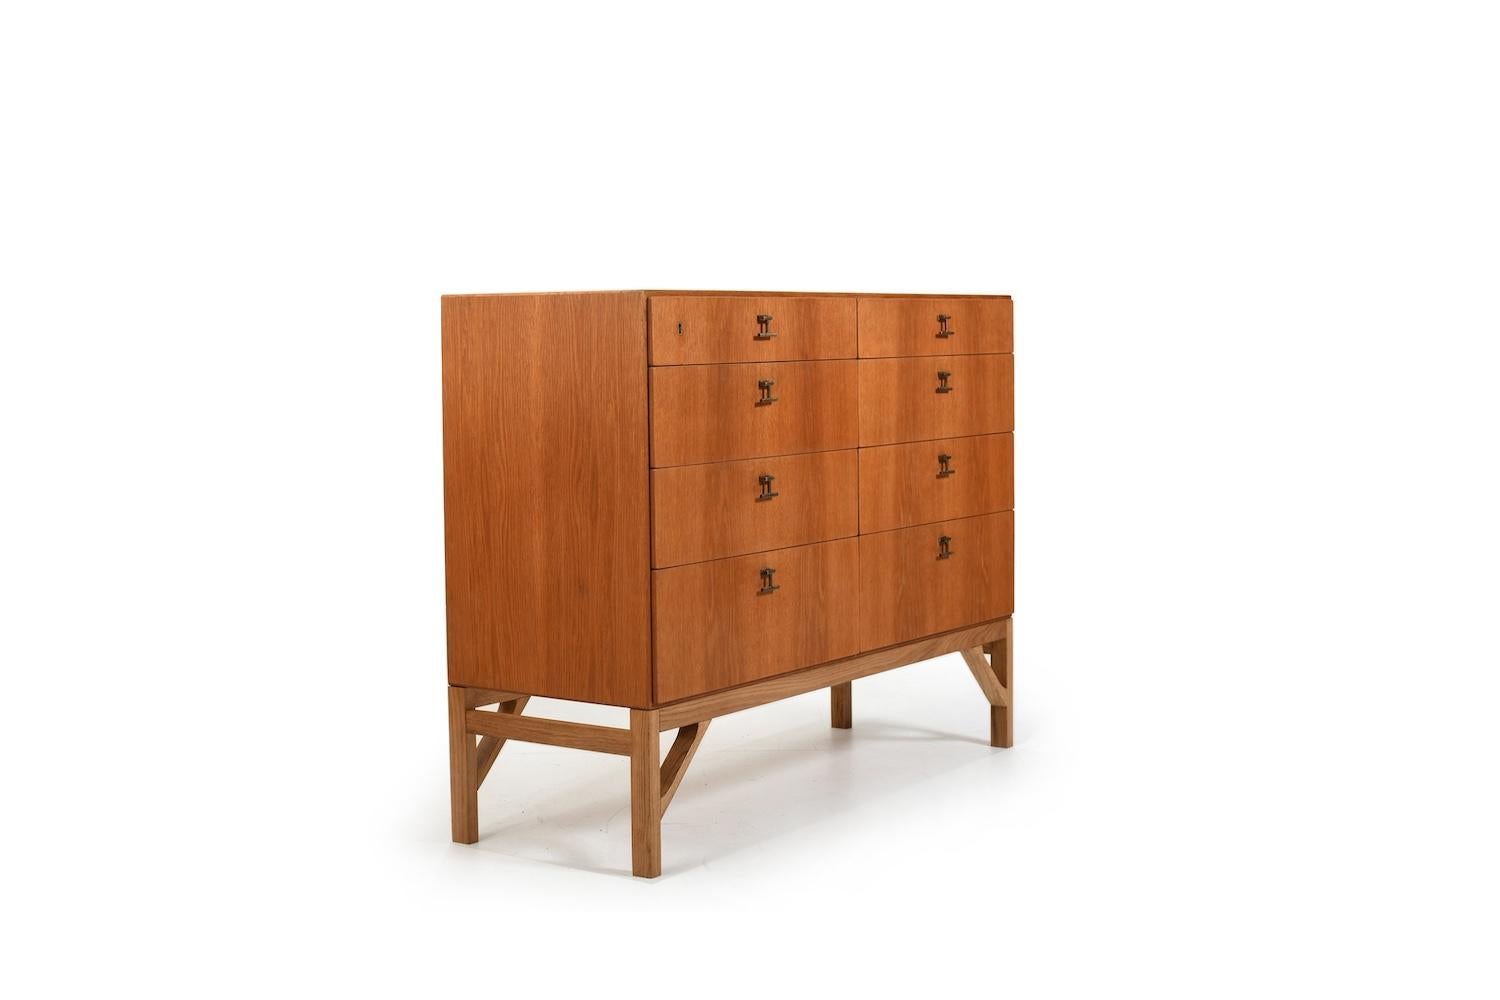 20th Century Chest of Drawers by Børge Mogensen for FDB Møbler 1960s For Sale